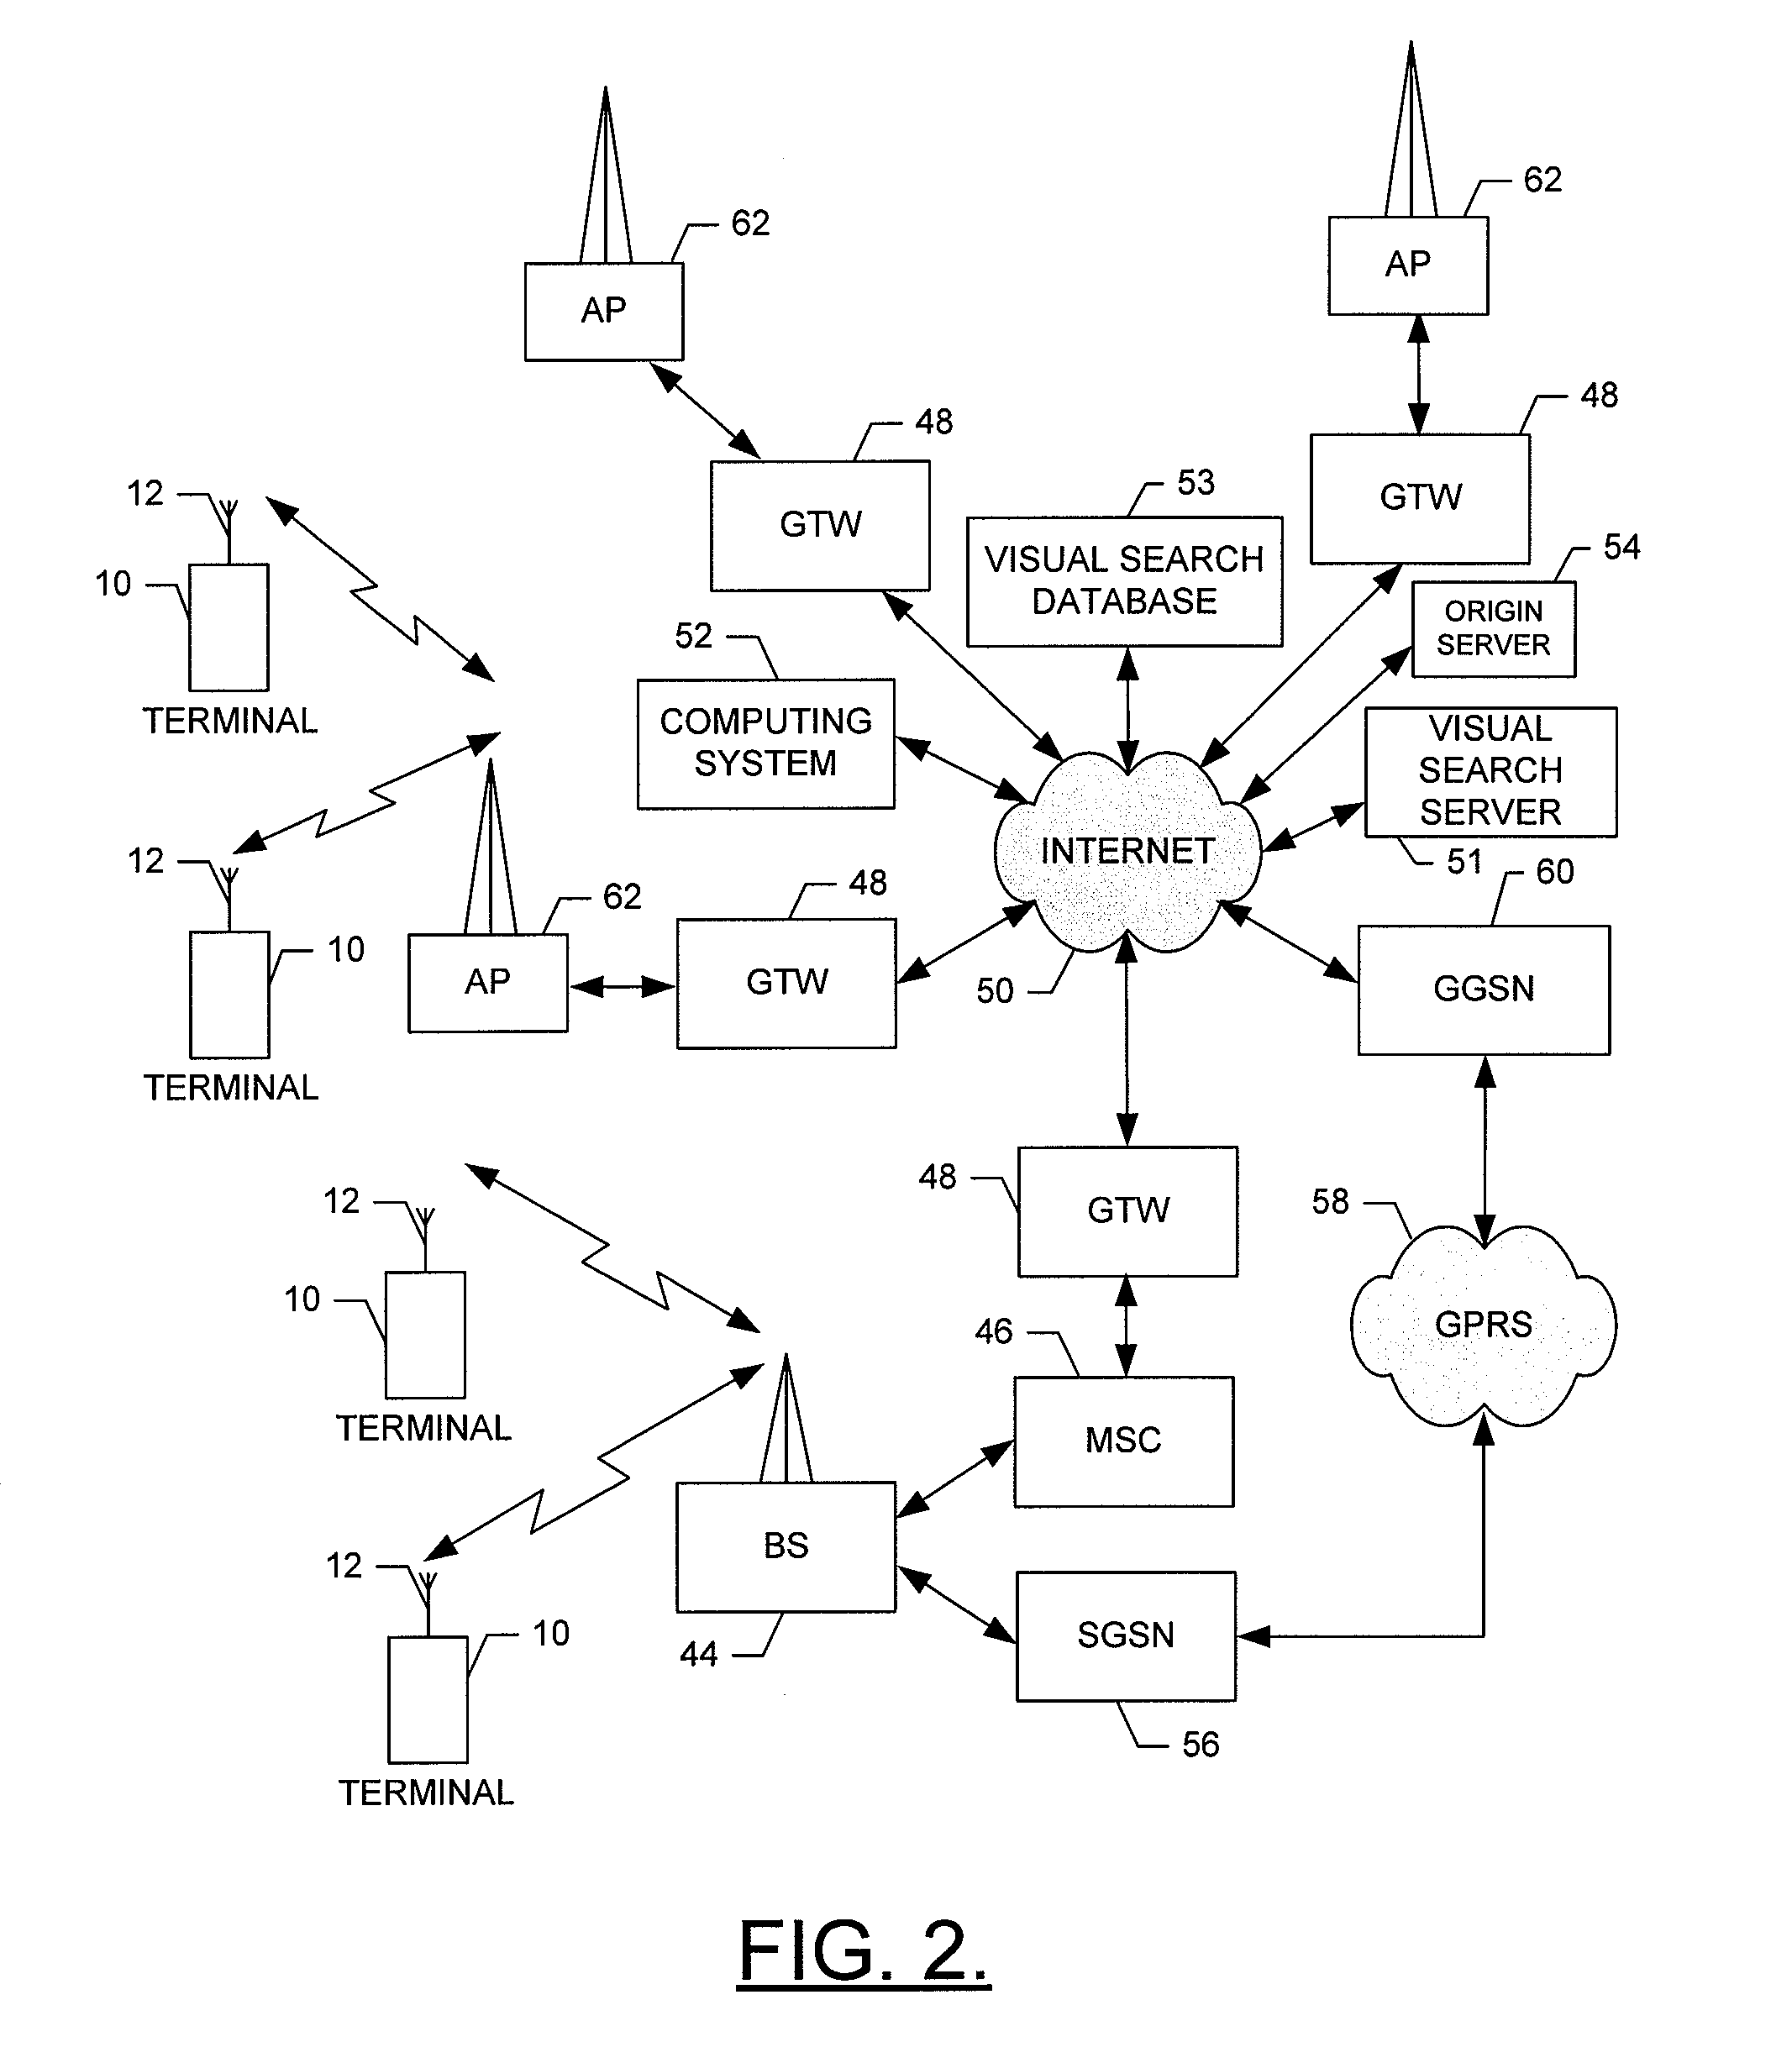 Method, Apparatus and Computer Program Product for Performing a Visual Search Using Grid-Based Feature Organization